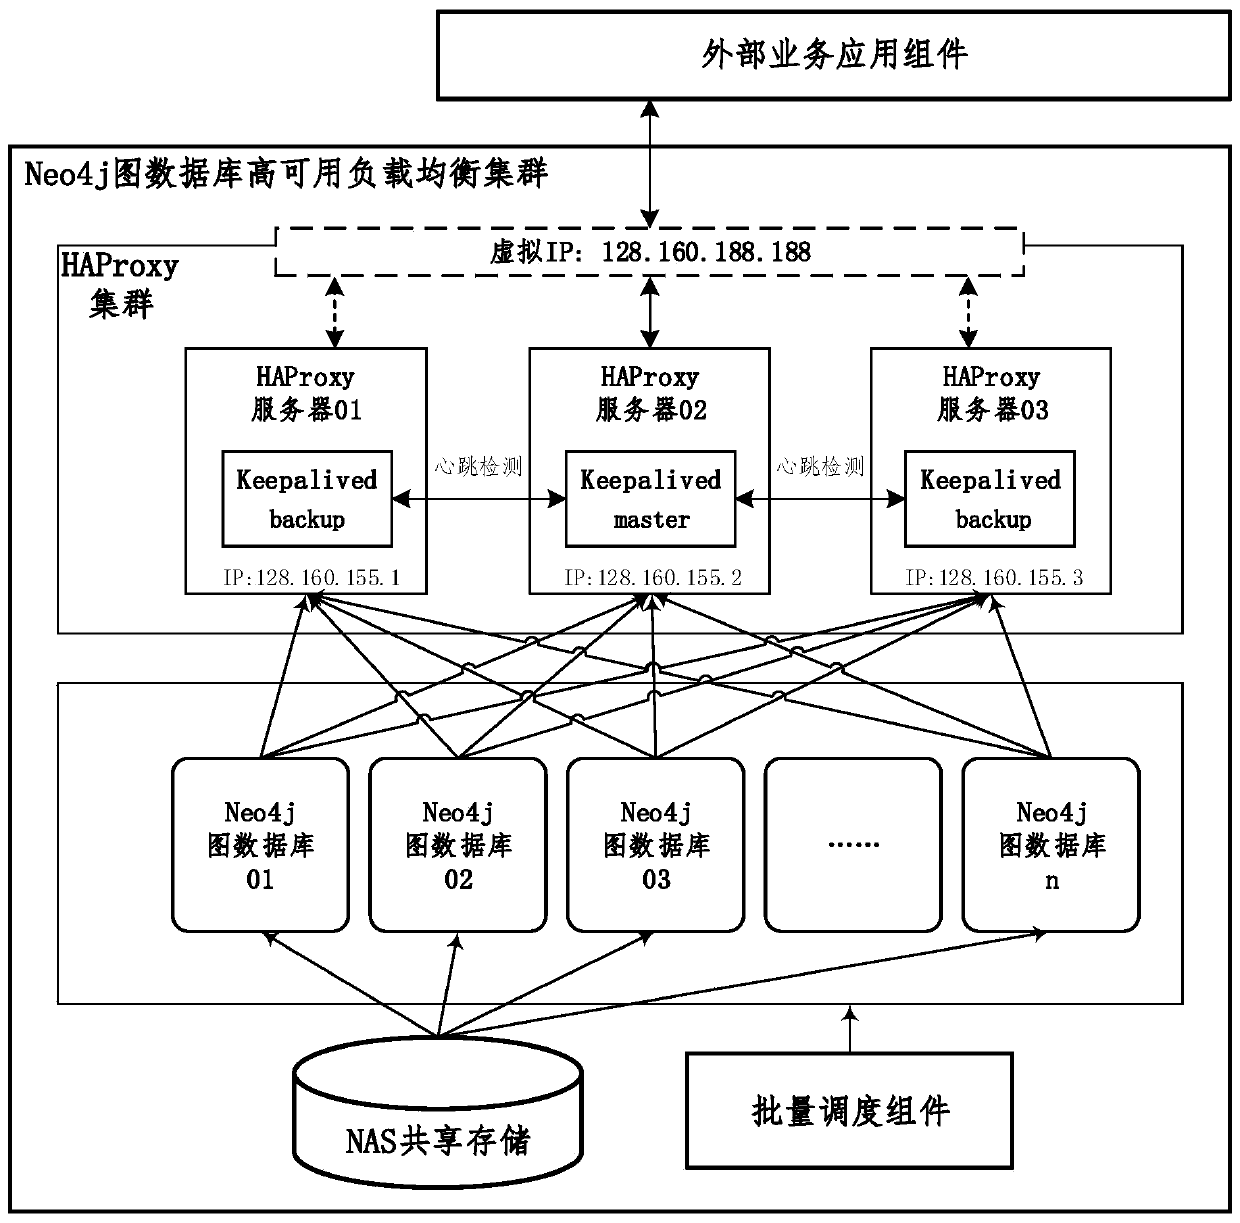 Neo4j graphic database system and Neo4j graphic database system access method and device